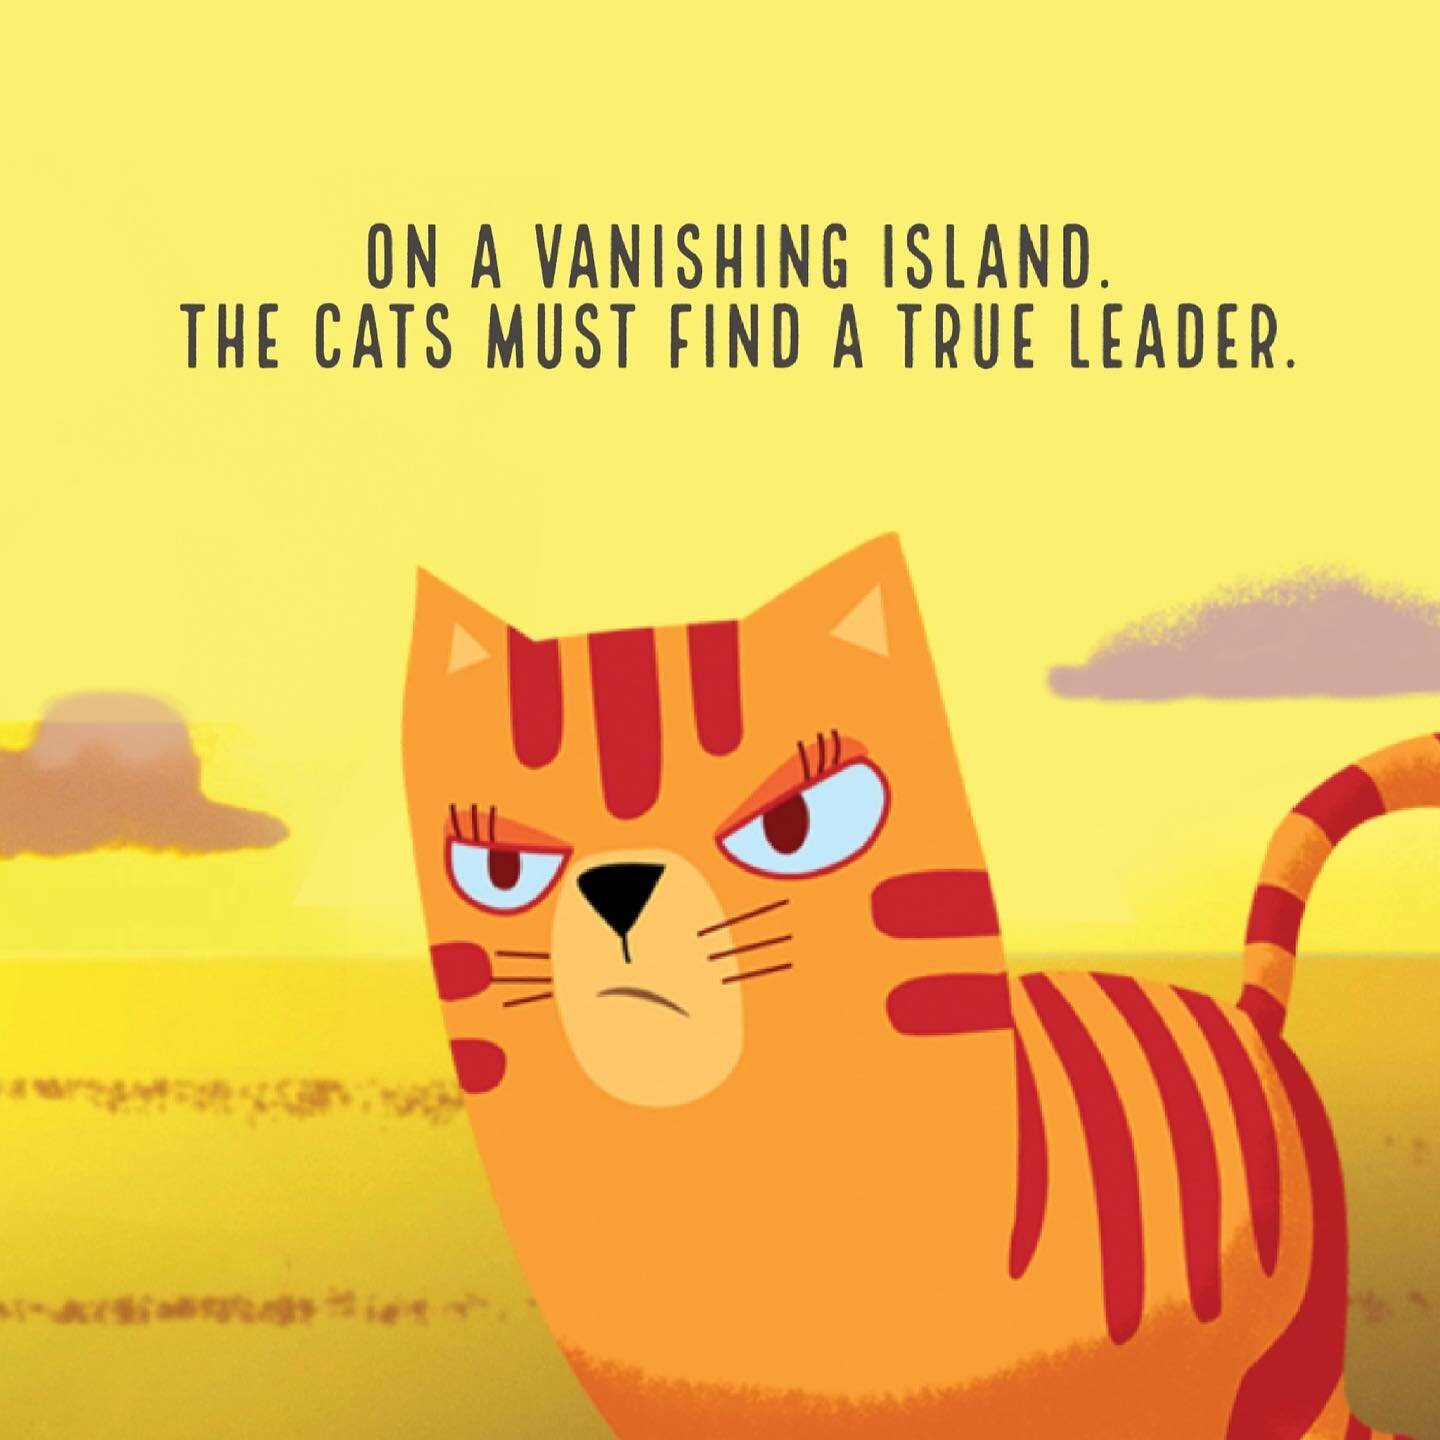 On a vanishing island the cats must find a true leader. 
Who will that be&hellip;? 
#RepublicOfCatsMovie #VanishingUtopia #republicofcats #catart #cats_of_instagram #ilovecats #caturday #caturdaycuties #meow #islandgirl #islandvibes #globalwarming